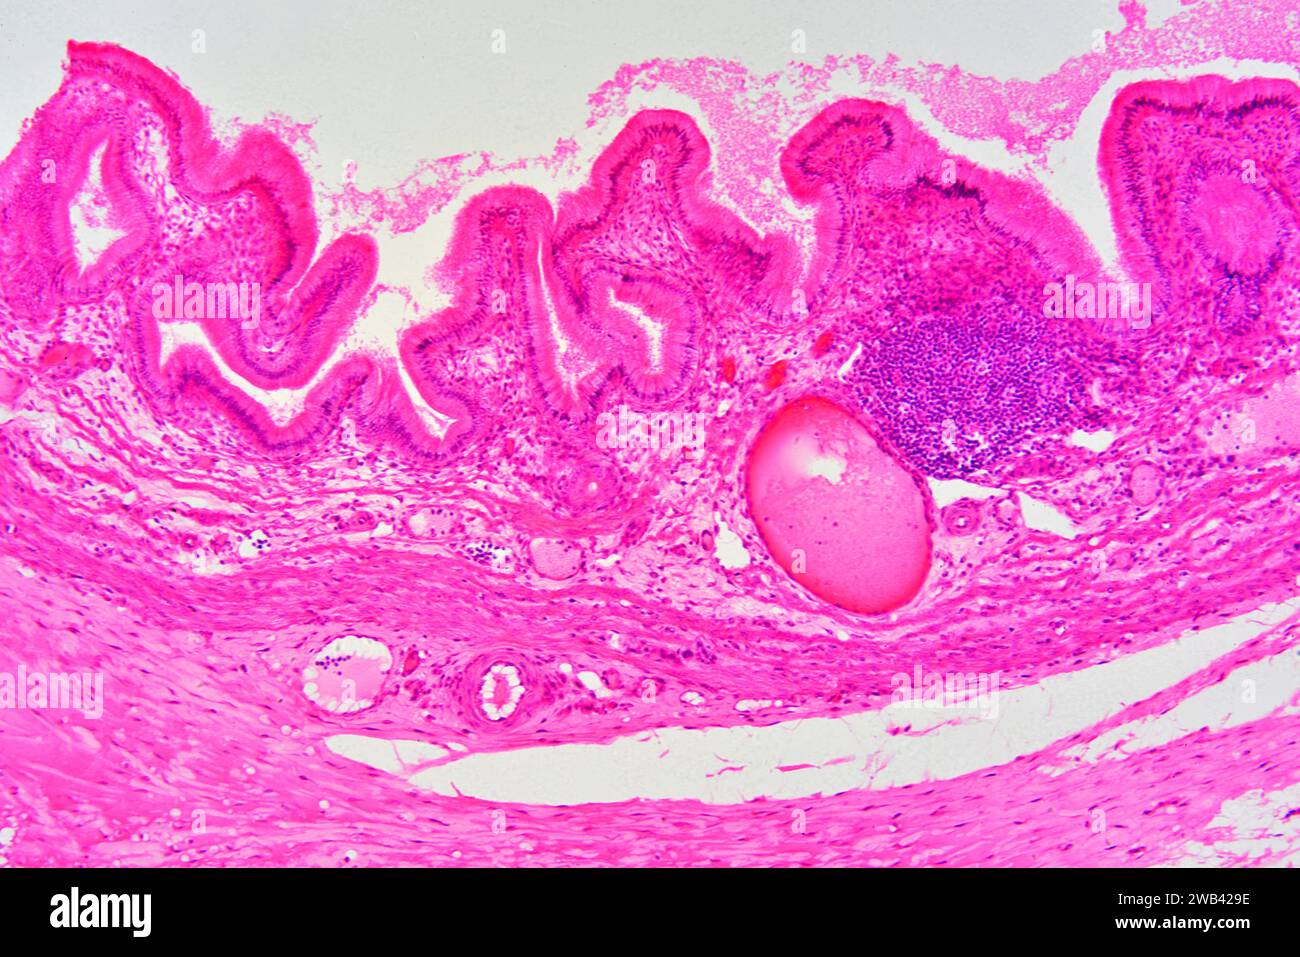 Gallbladder wall showing columnar epithelium with mucosal folds, connective tissue, blood vessels and smooth muscle fibers. Photomicrograph X75 at 10 Stock Photo